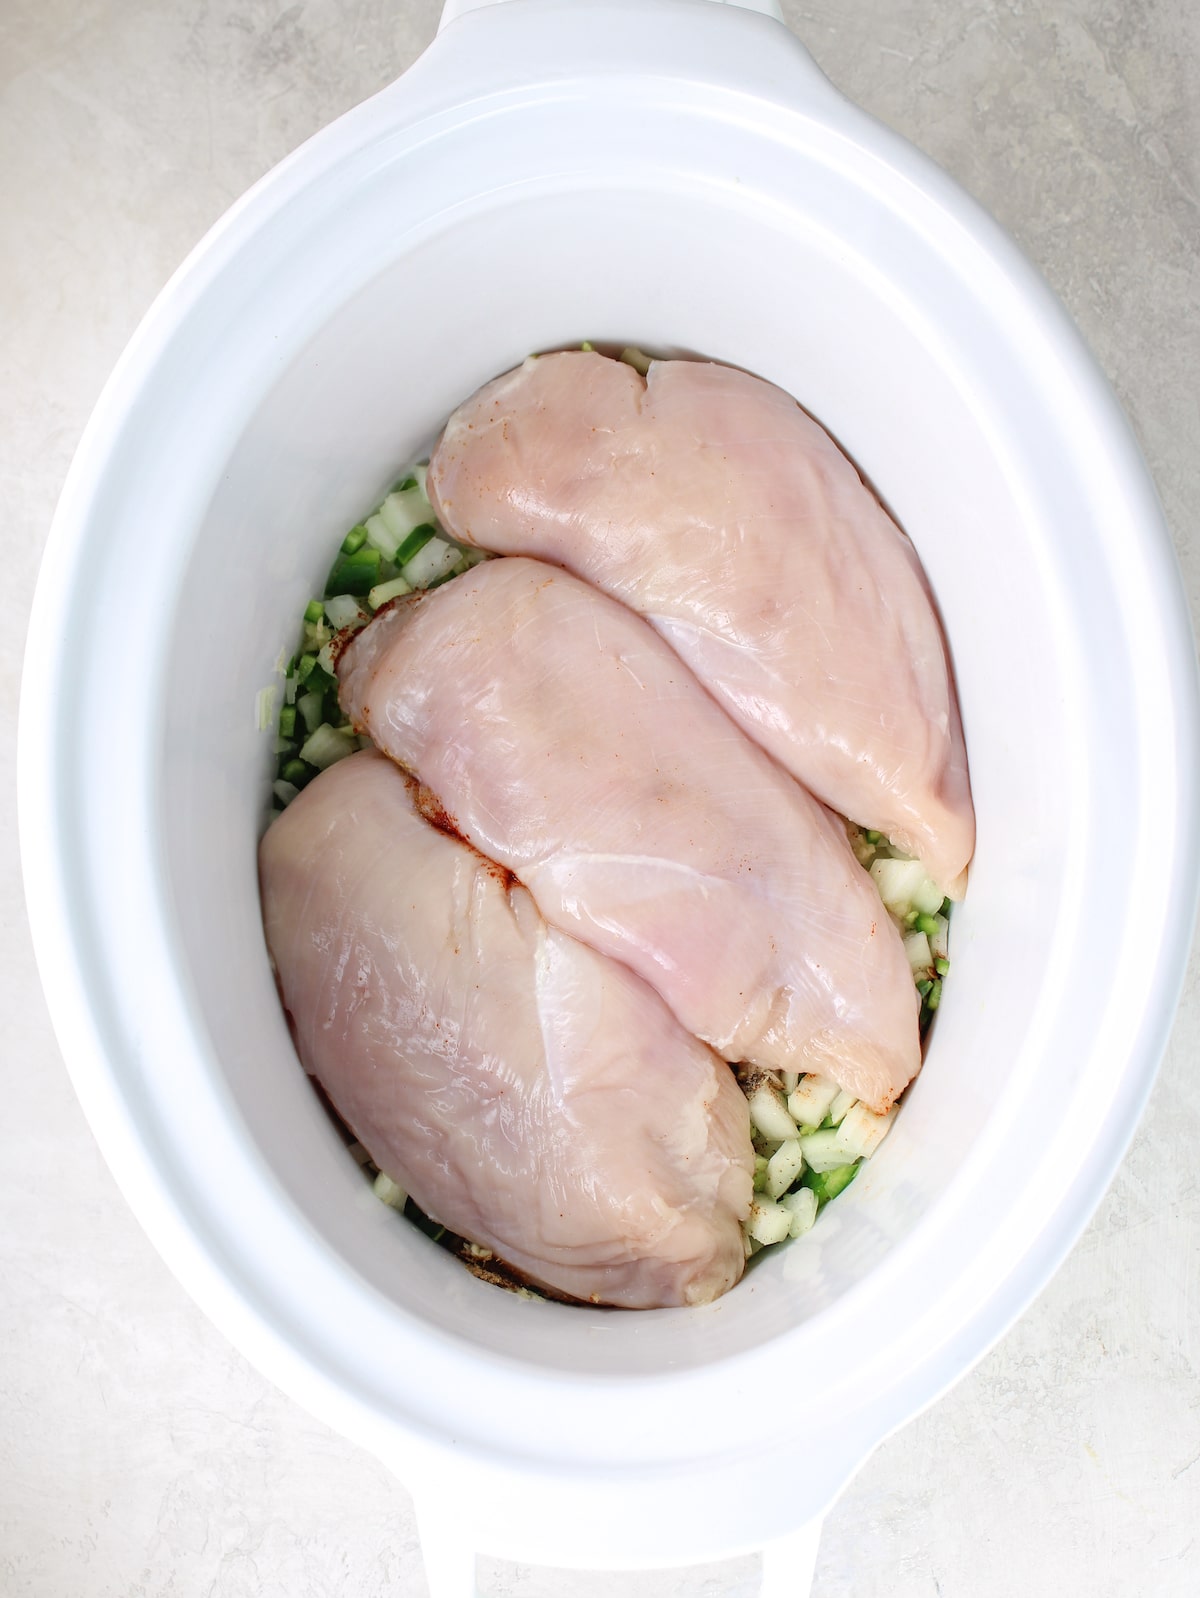 A slow cooker with onion mixture, spices, and raw chicken.